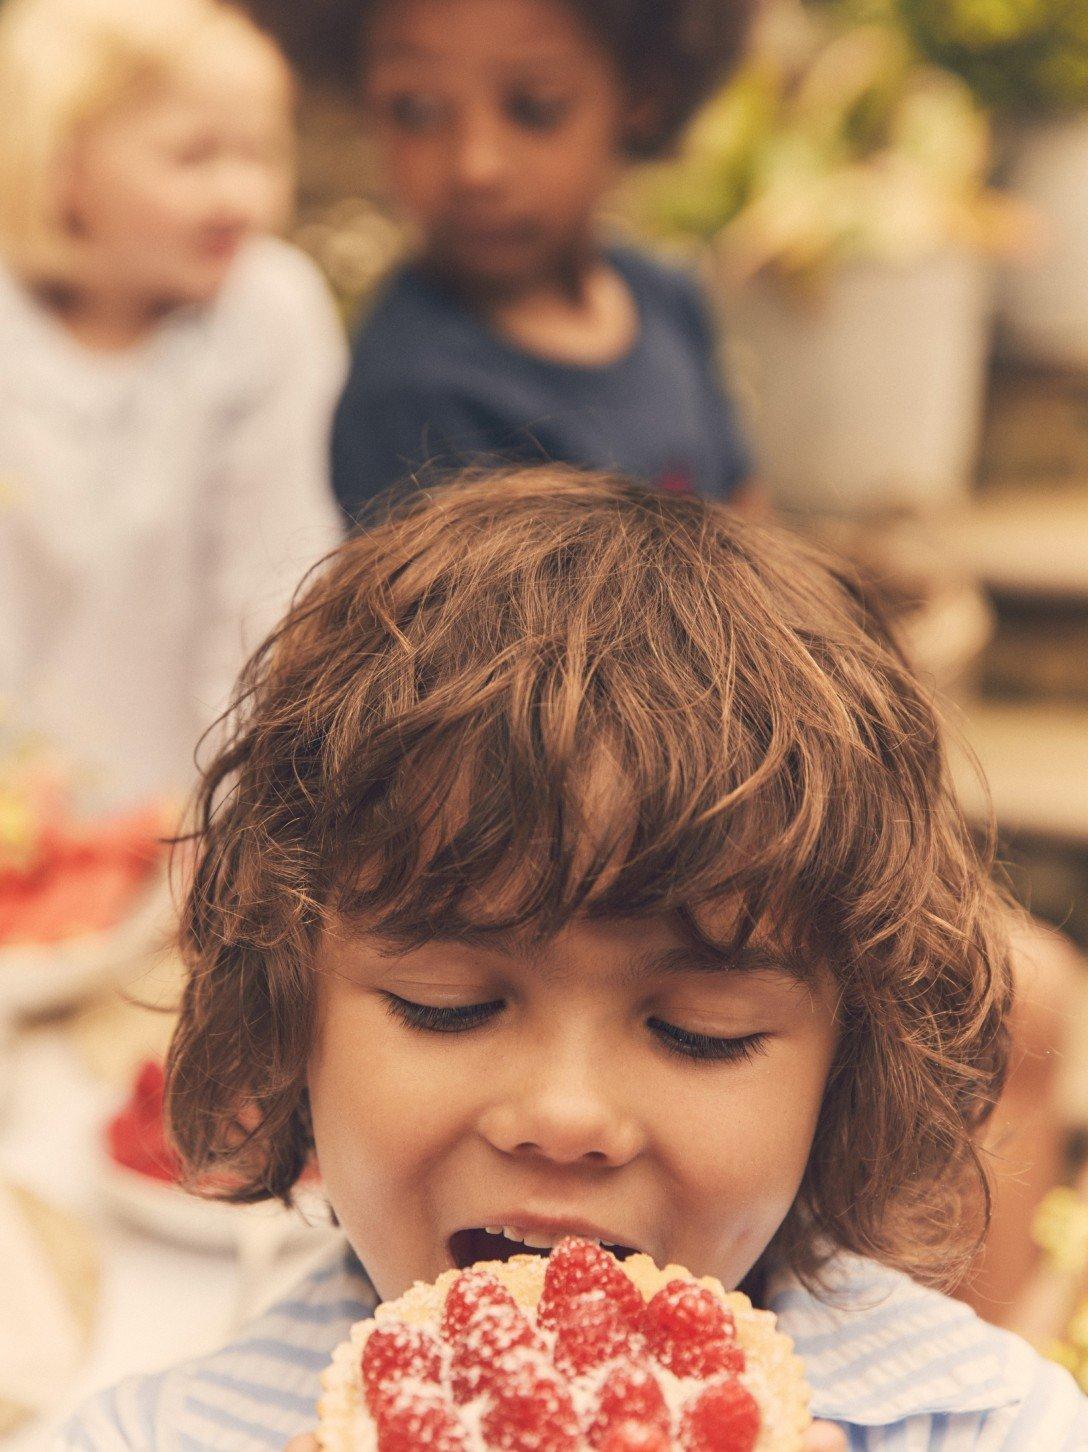 a young boy eating a piece of cake with strawberries on top